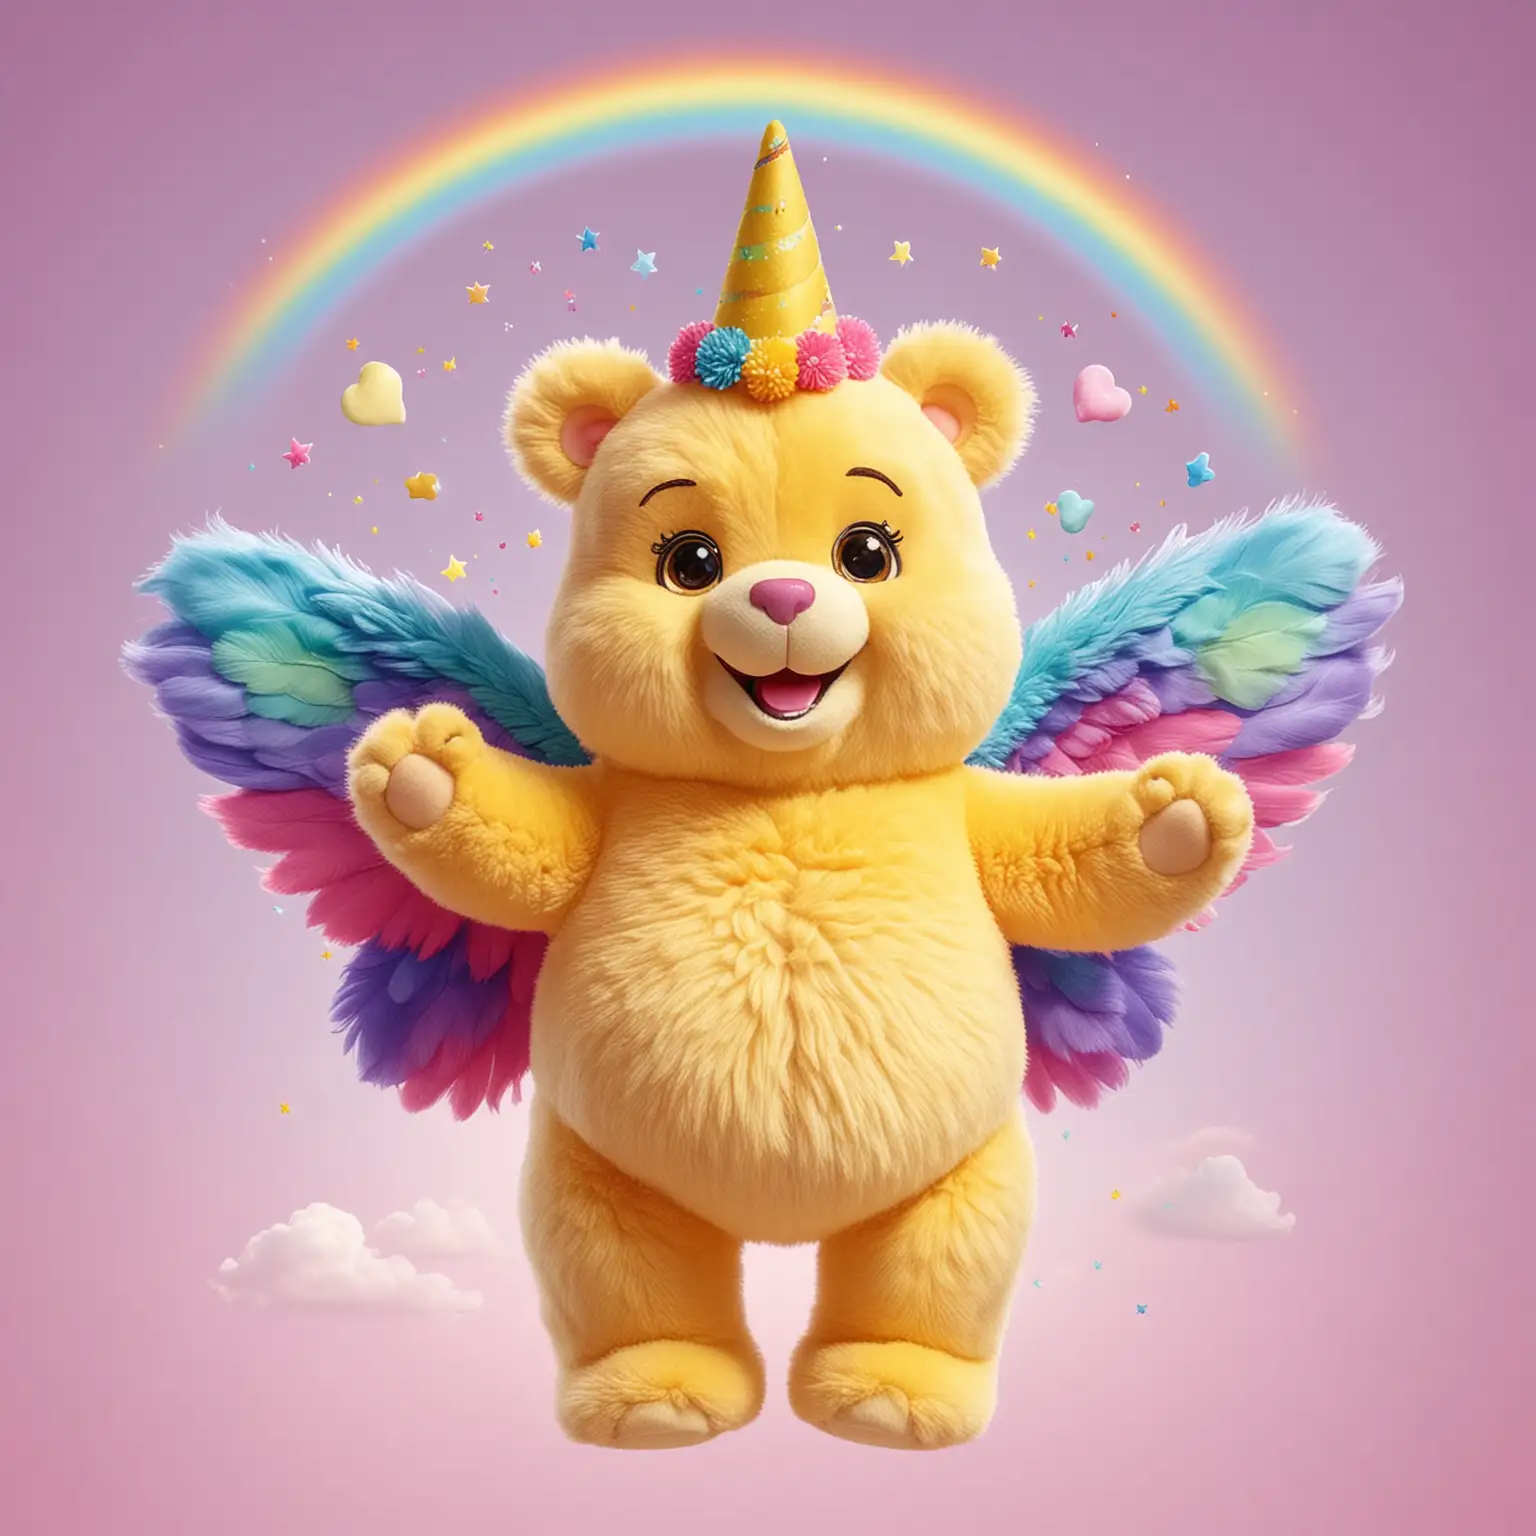 happy magical flying fuzzy yellow care bear with rainbow unicorn horn and magical rainbow wings, flying